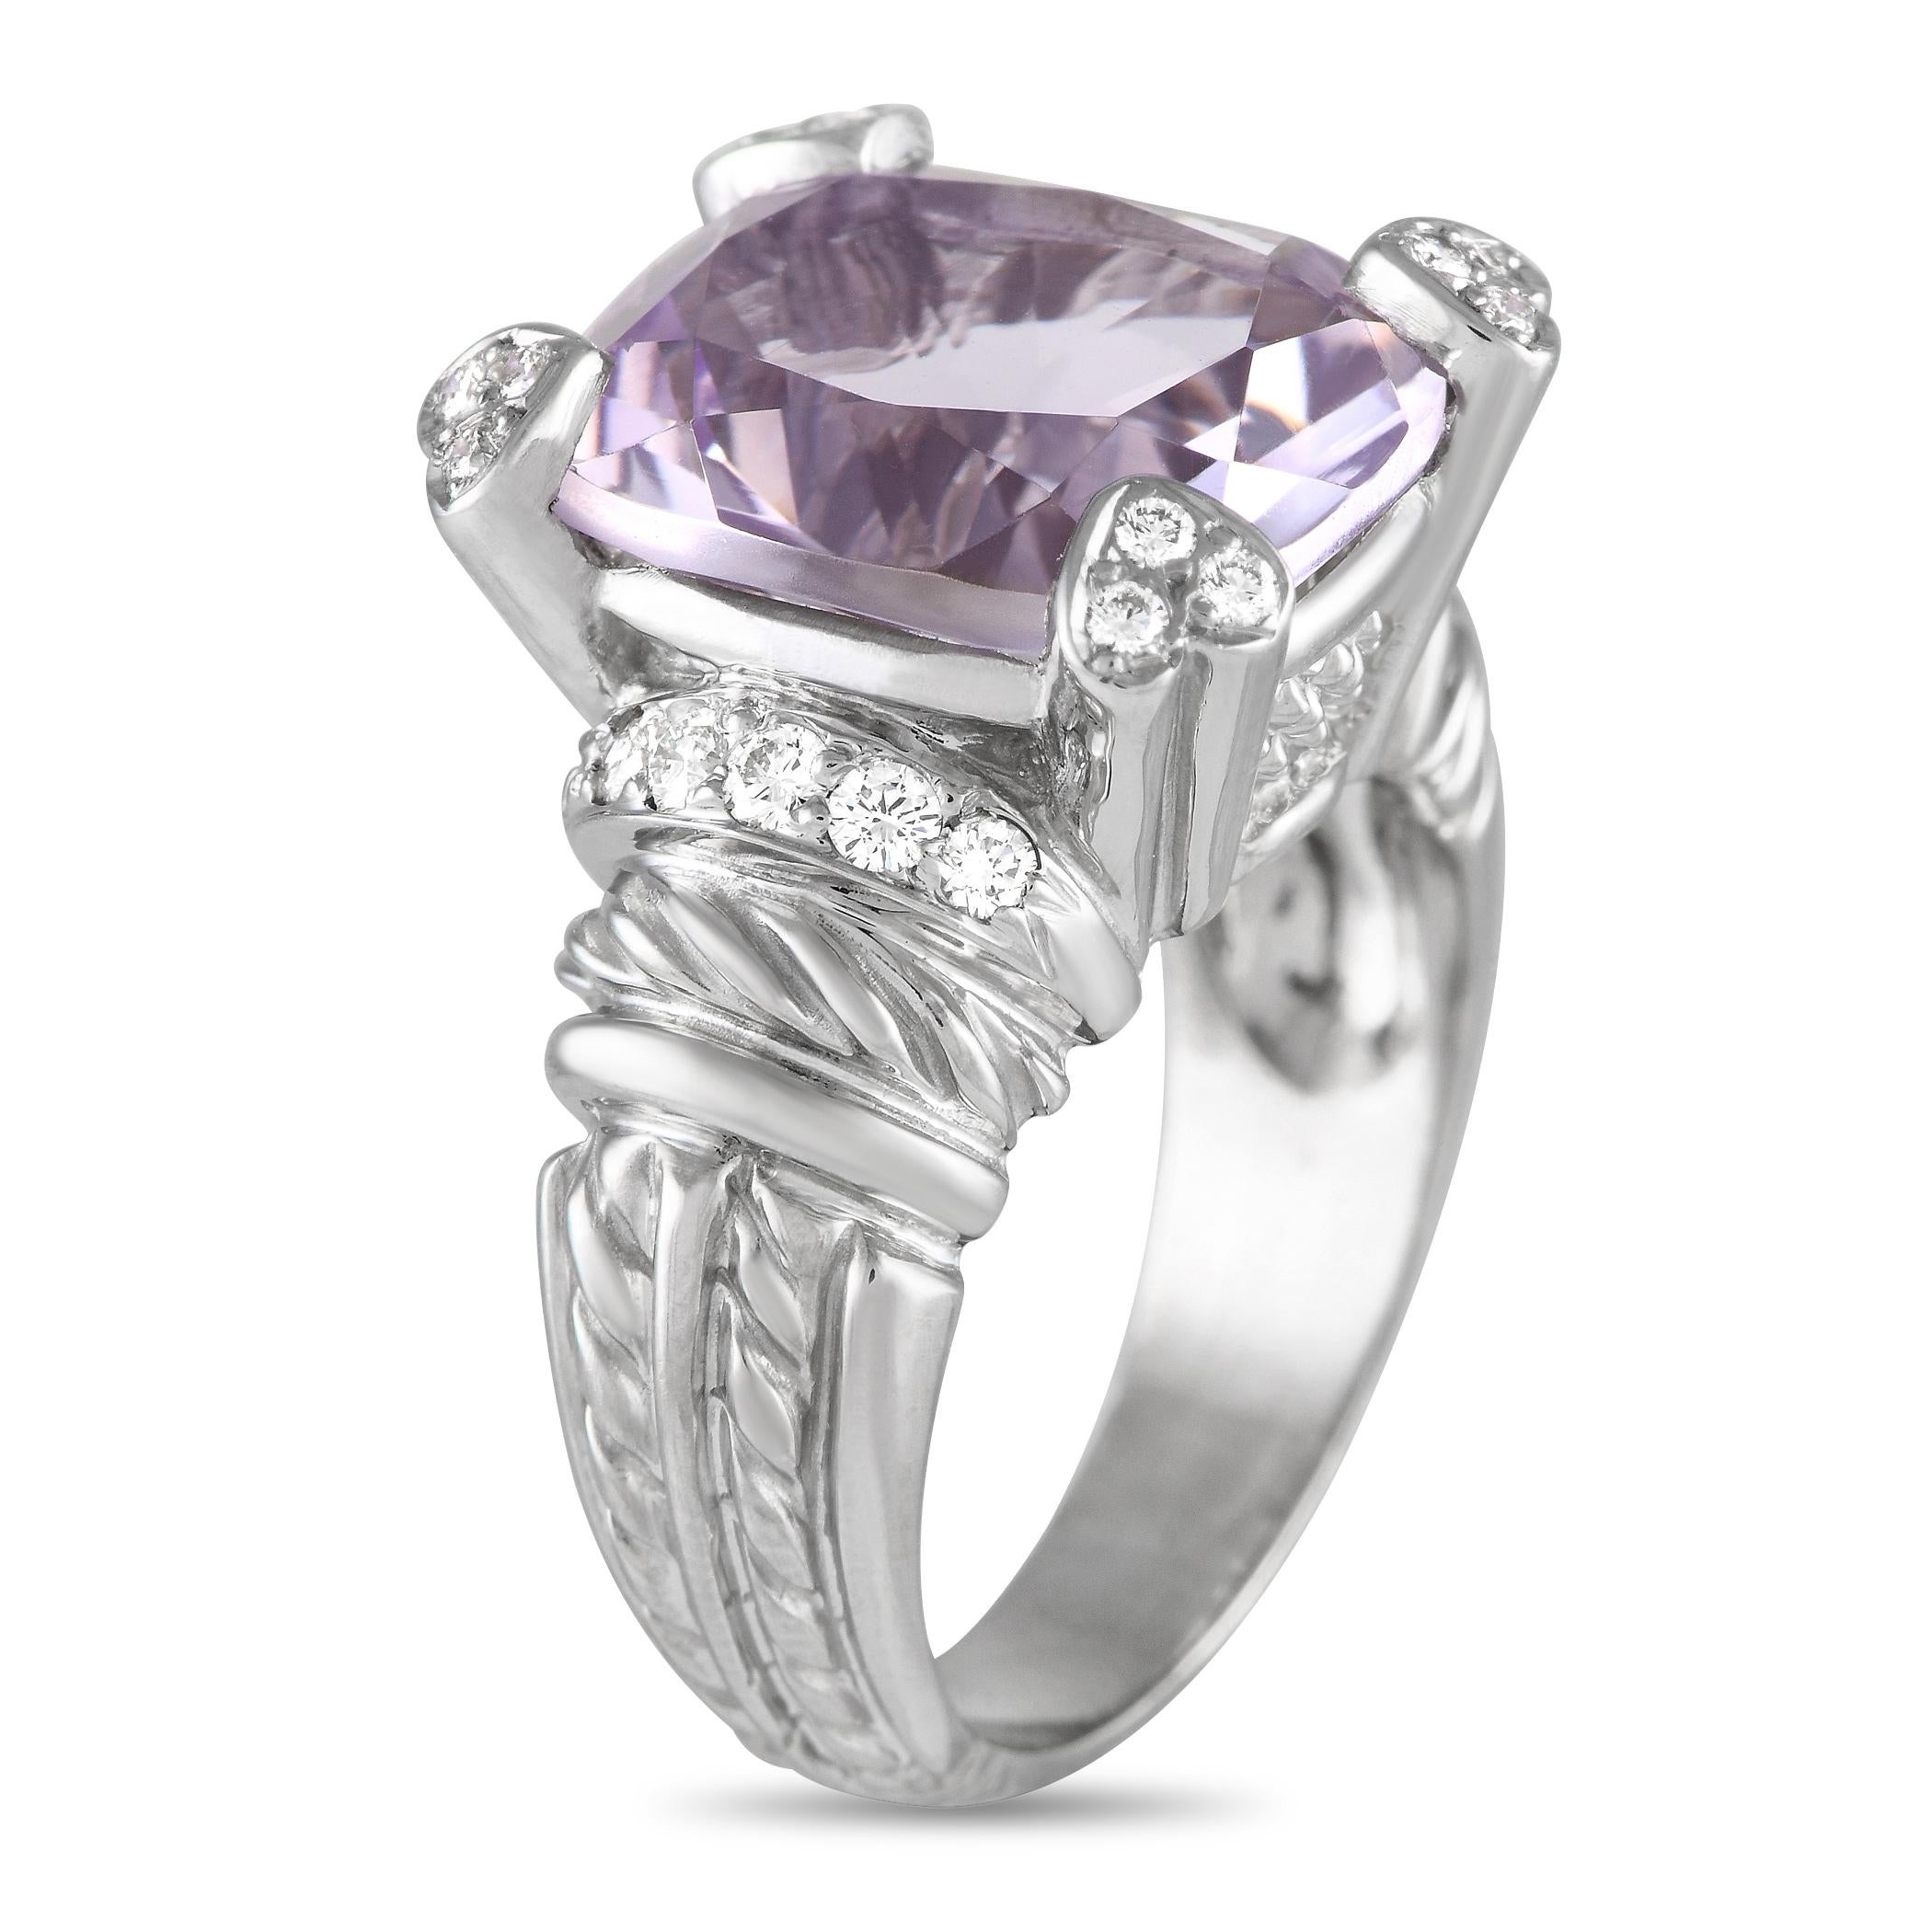 An intricate 18K White Gold setting provides the perfect foundation for this elegant Judith Ripka ring. A captivating Pink Quartz gemstone center stone adds an exciting pop of color to this classic accessory, while sparkling diamonds totaling 0.25